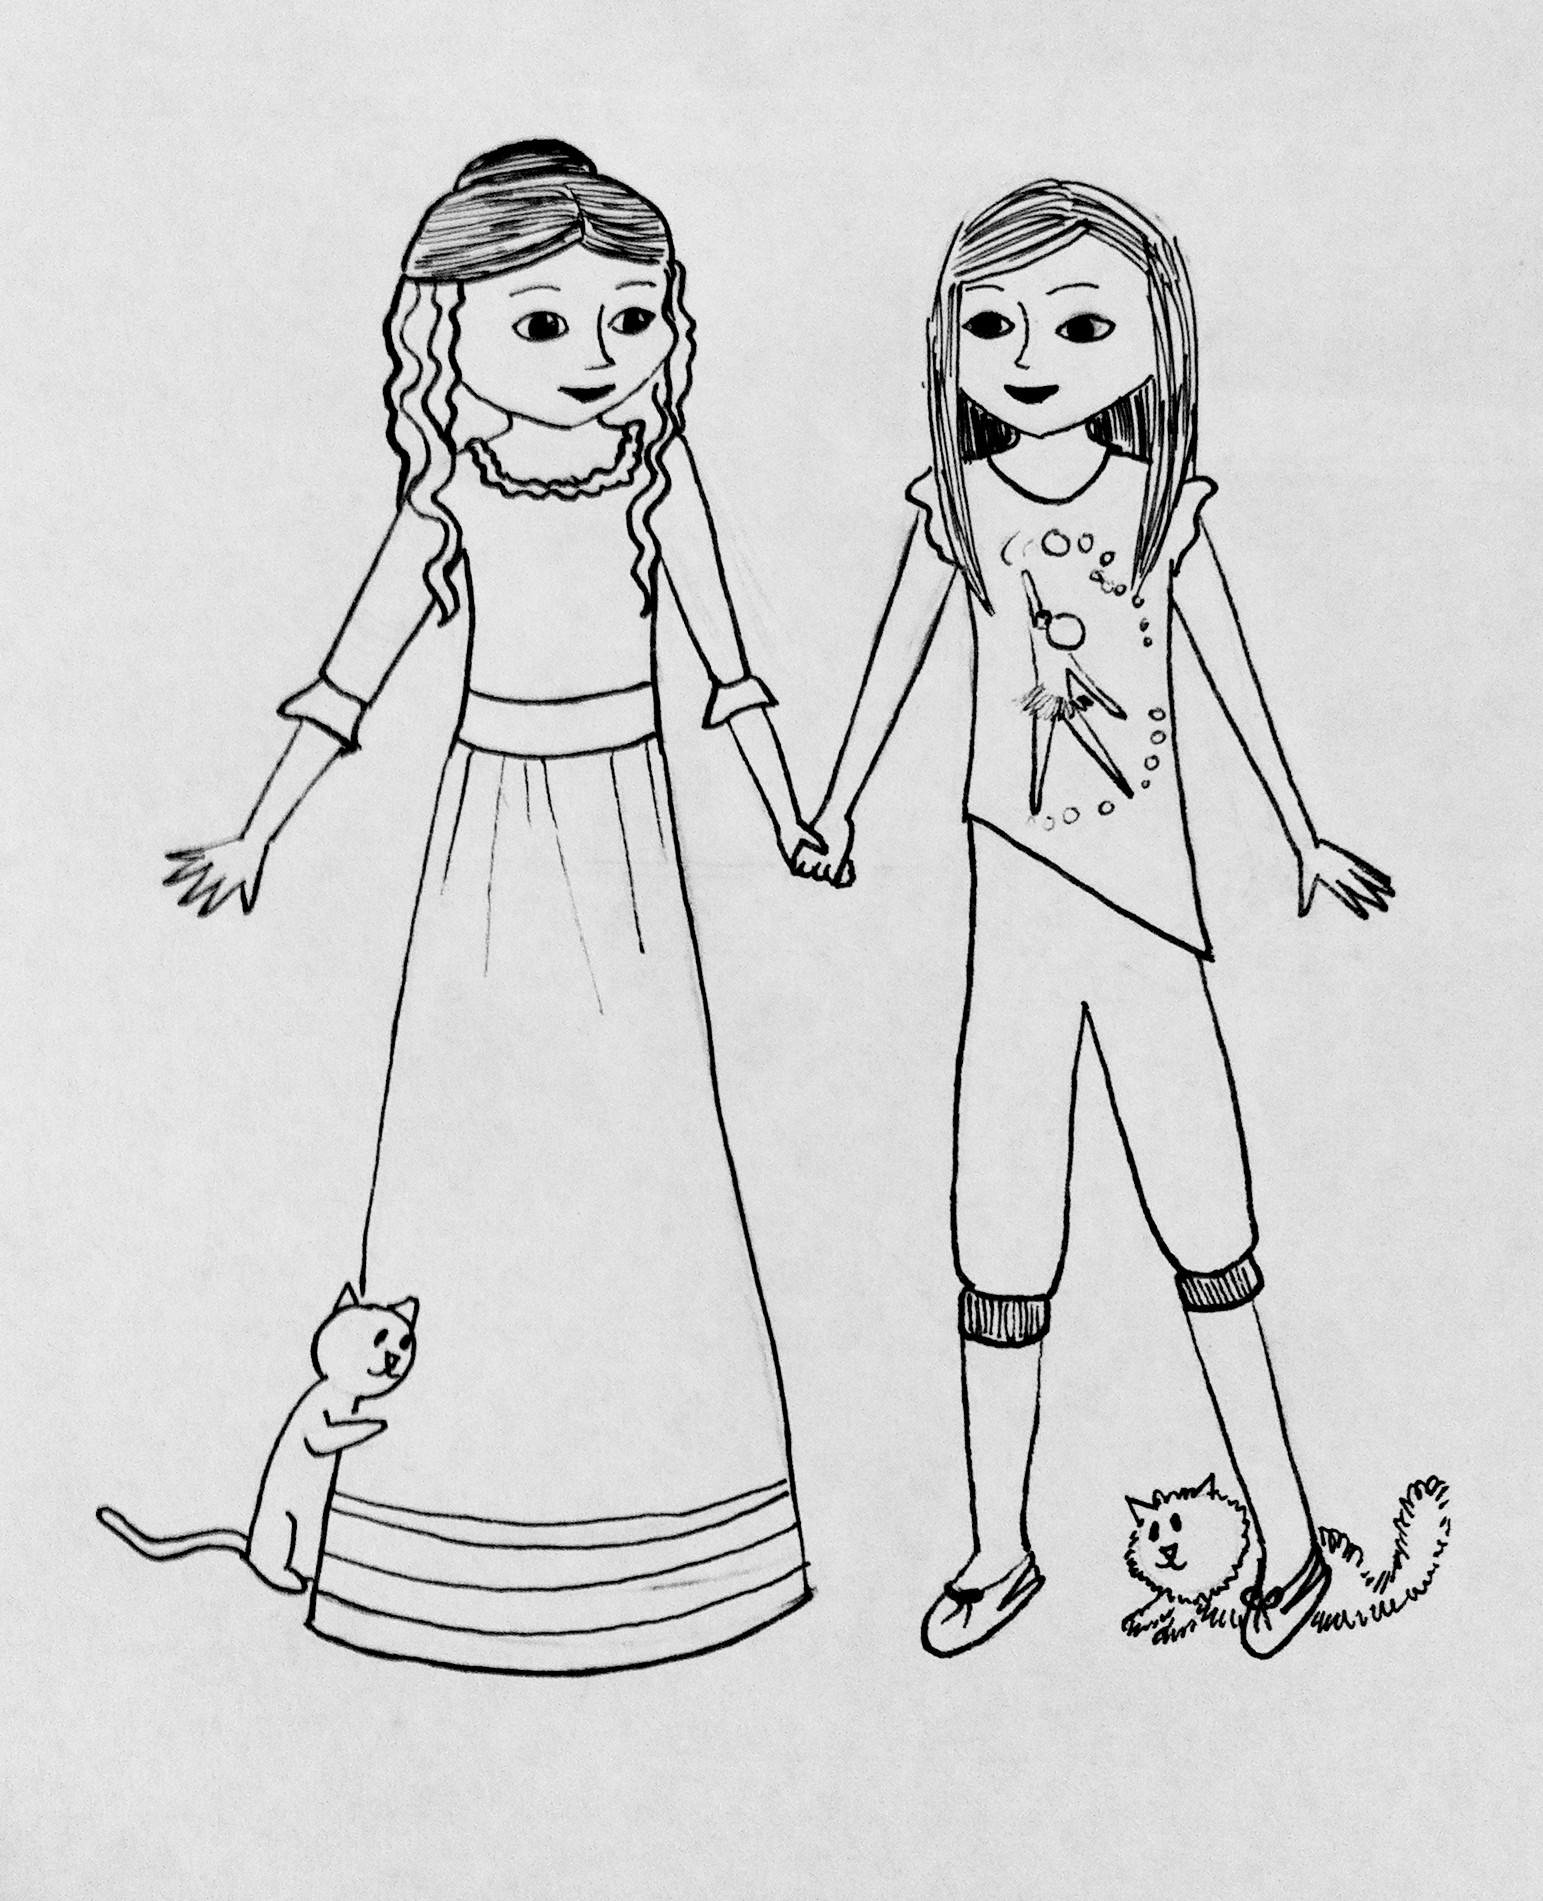 American Girl Doll Isabelle Coloring Pages
 More American Girl Coloring Pages